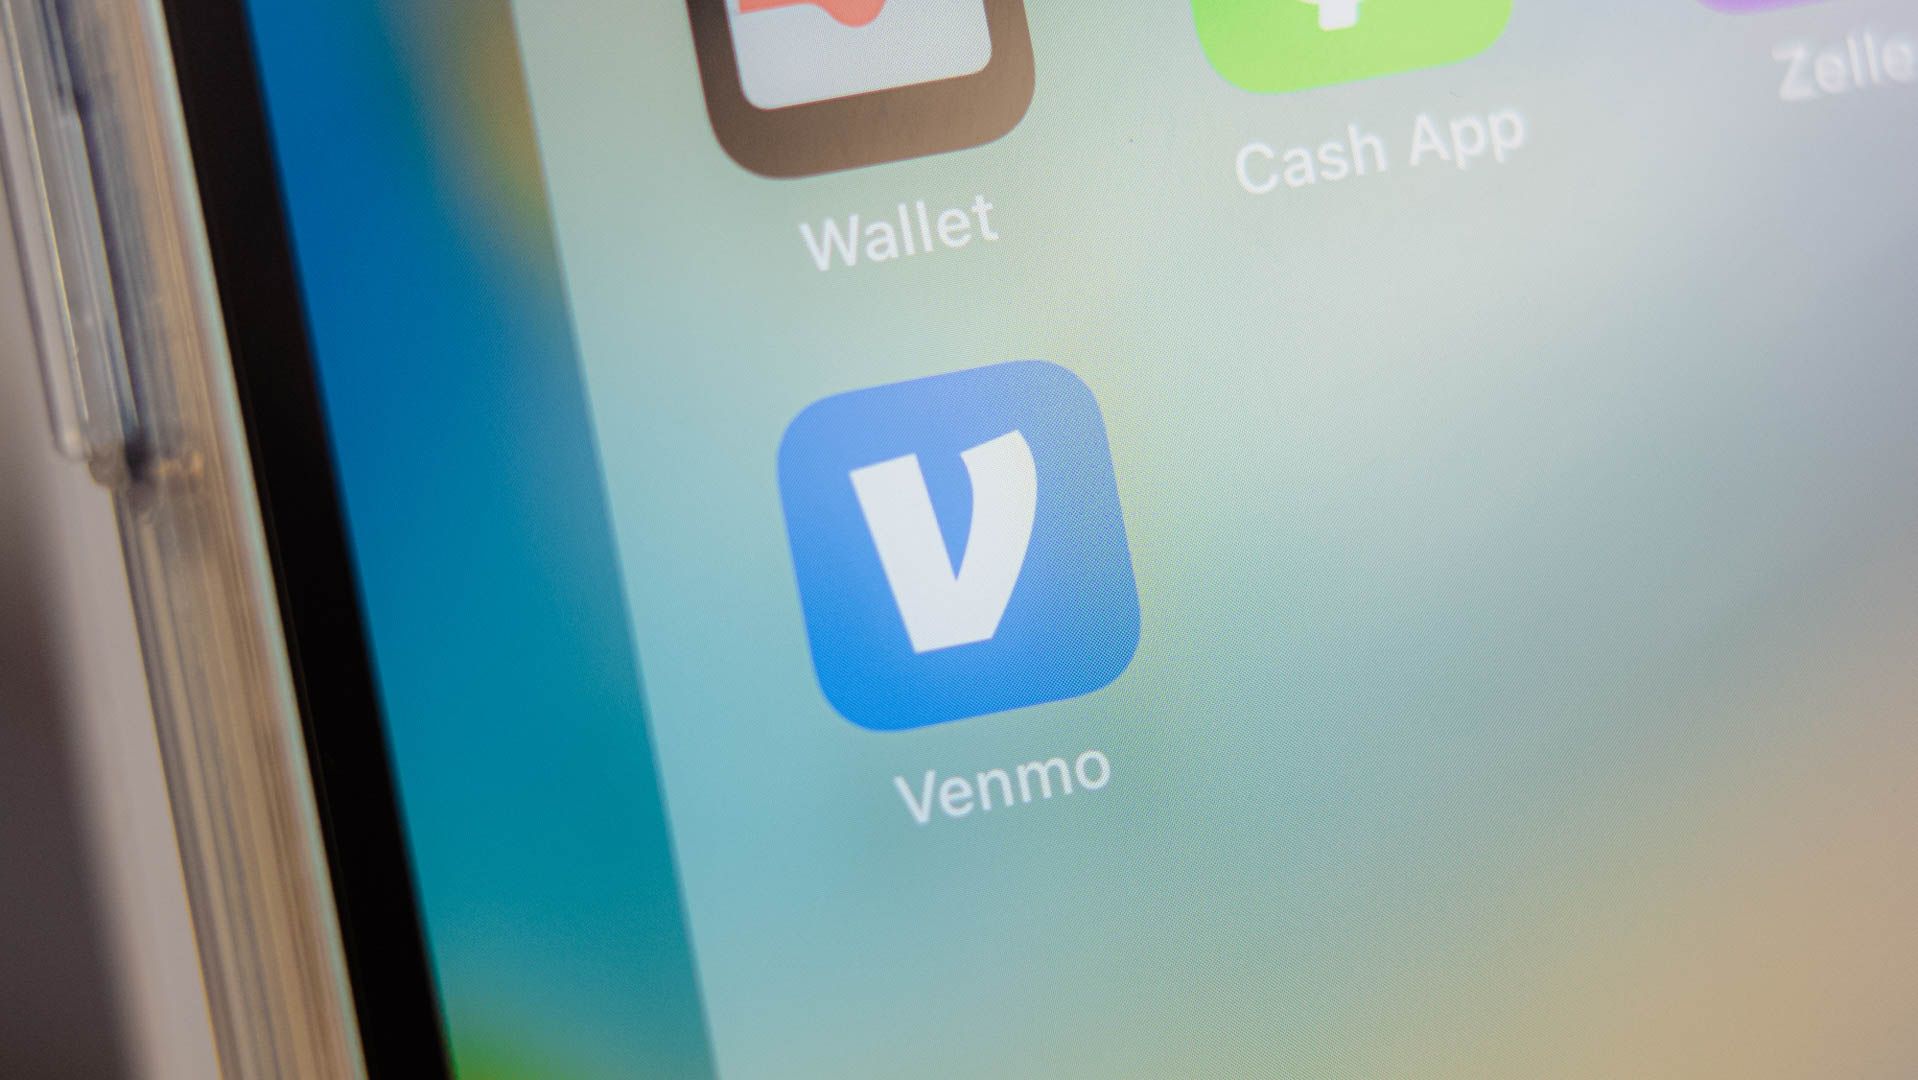 The Venmo app icon on an iPhone.